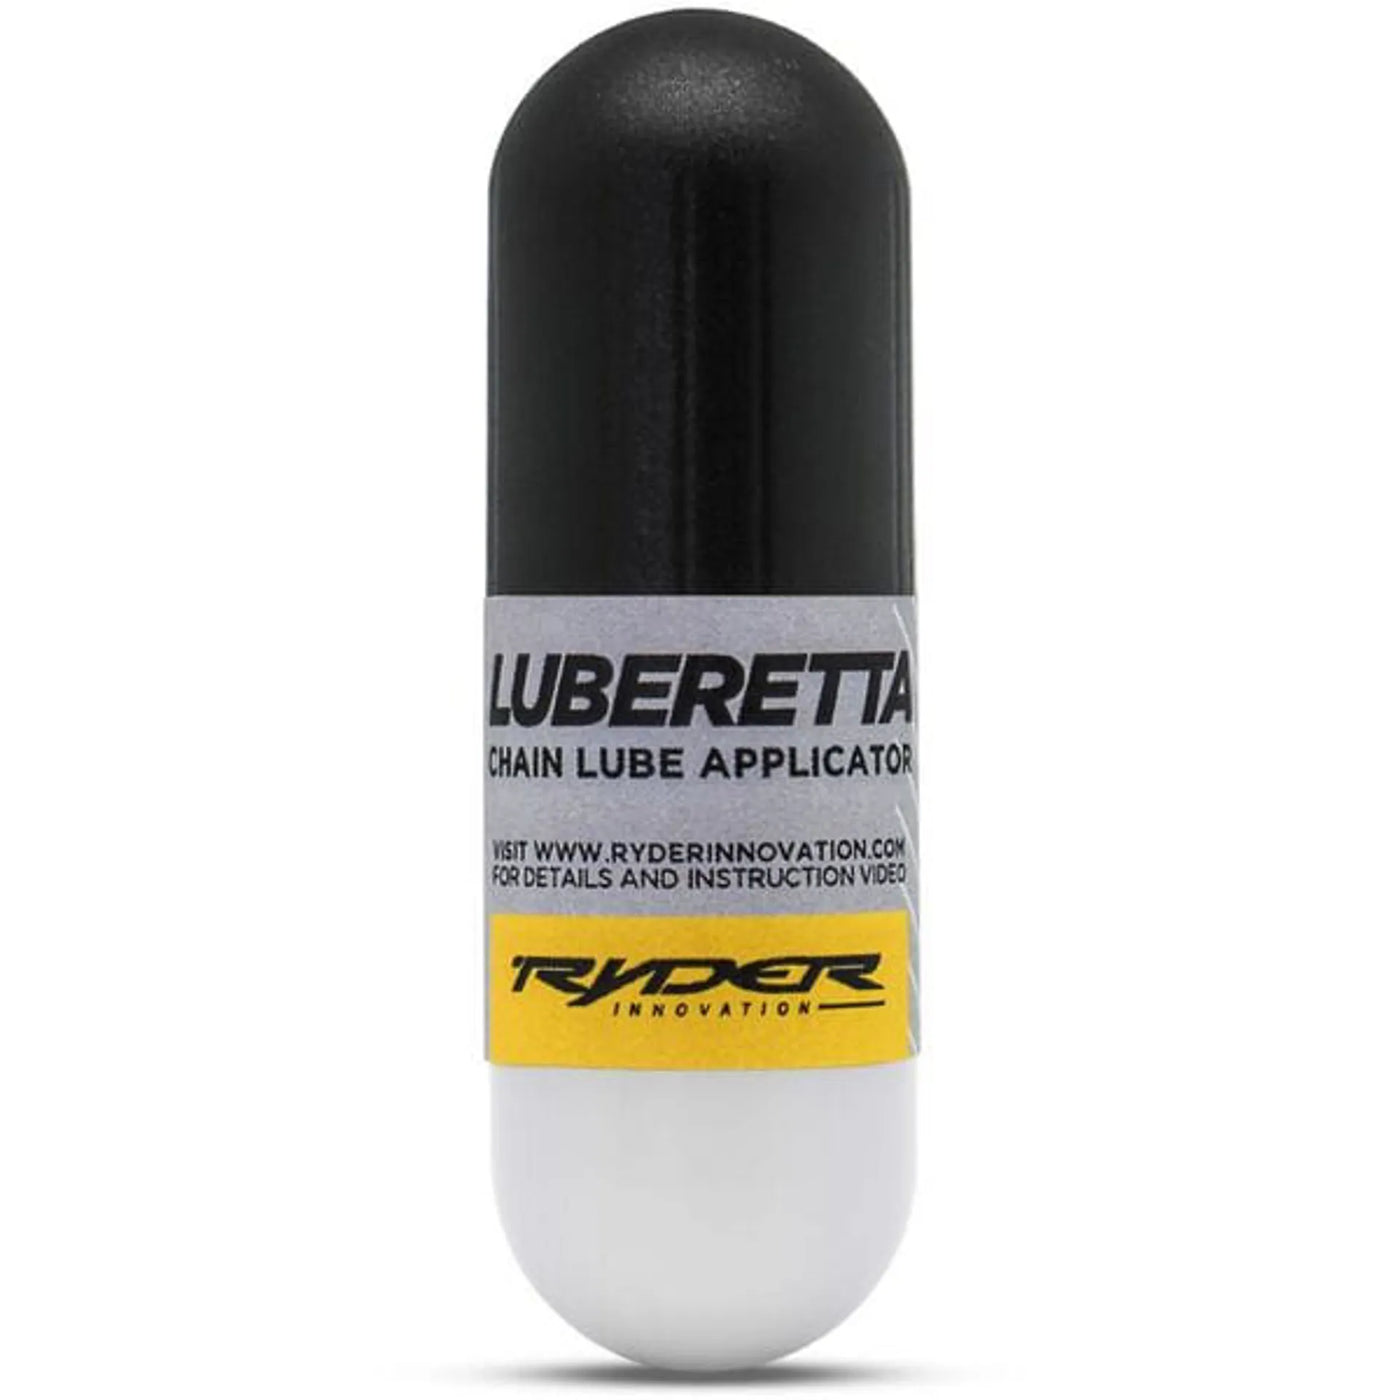 Ryder Chain Lube Applicator